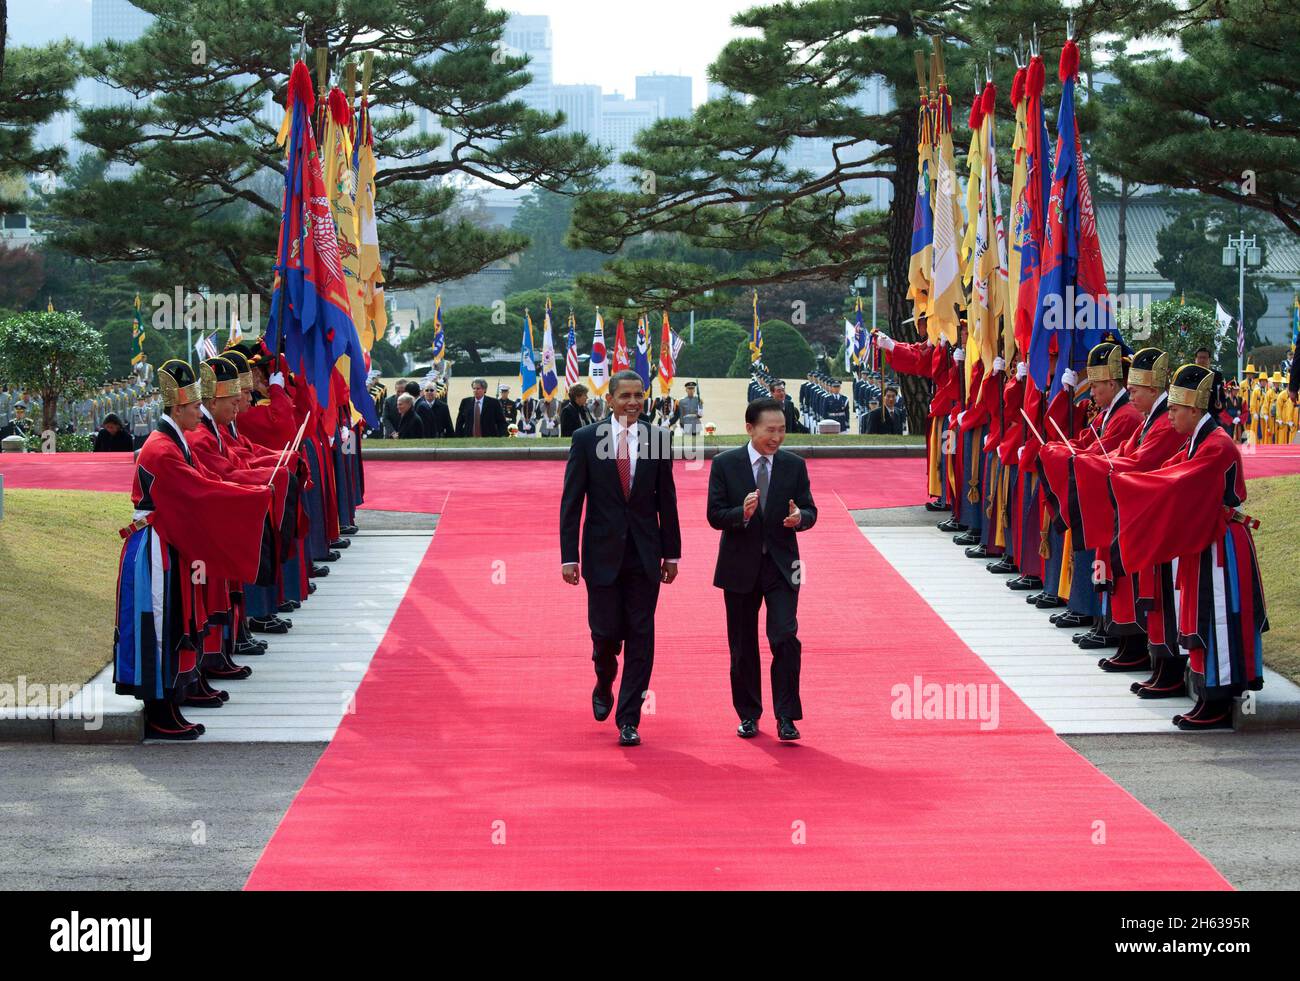 President Barack Obama walks with South Korean President Lee Myung-bak during an arrival ceremony at the Blue House in Seoul, South Korea, Nov. 19, 2009 Stock Photo